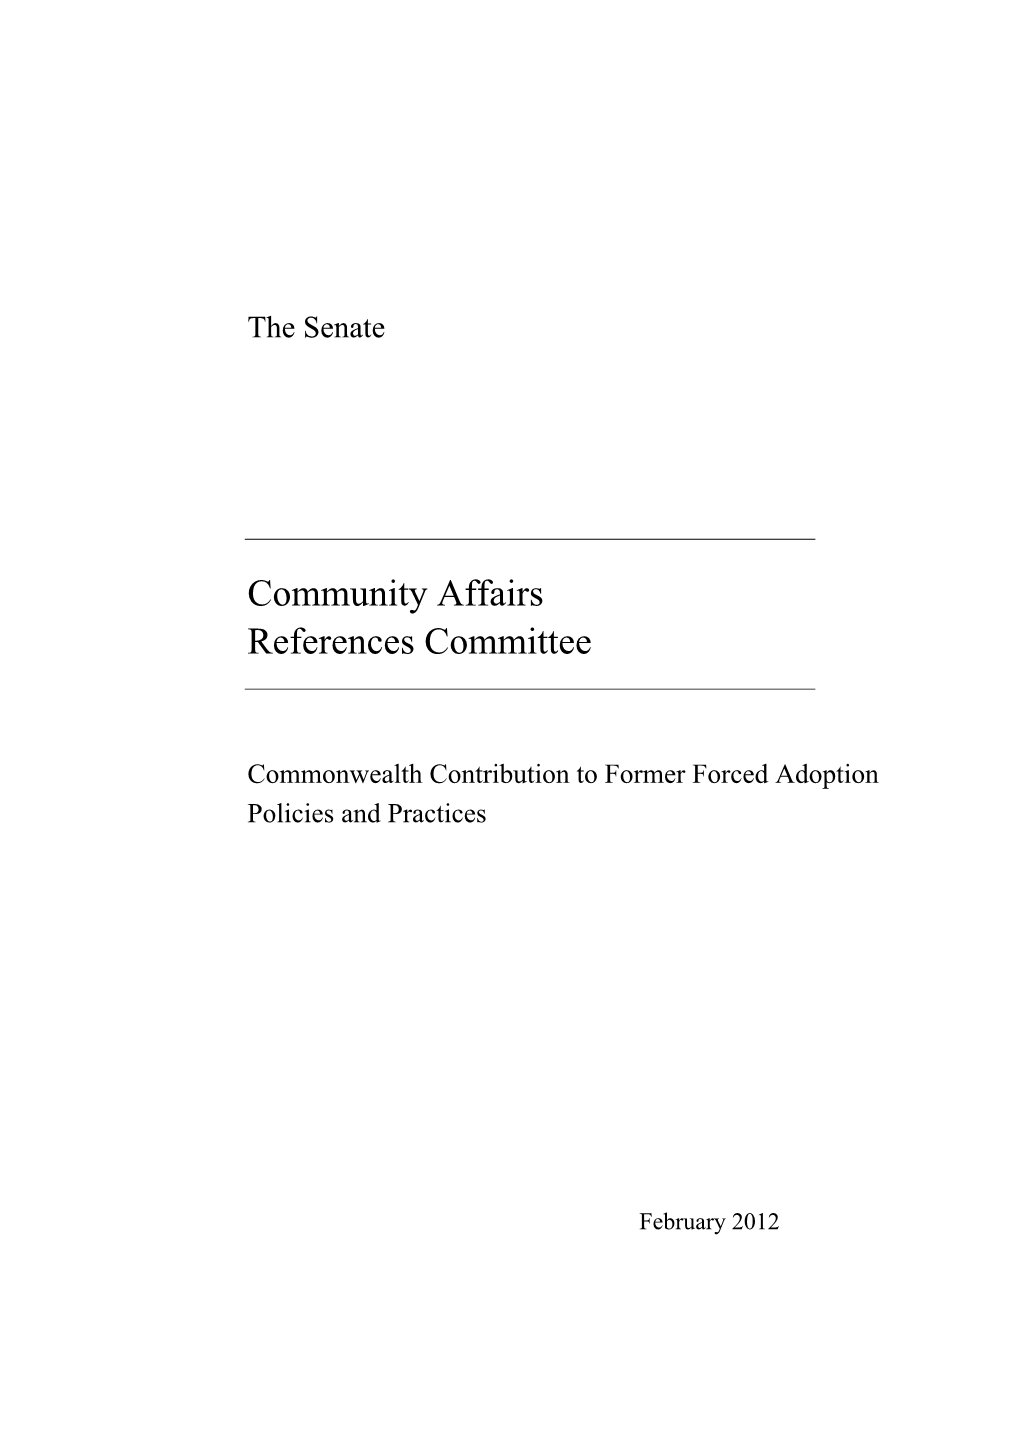 Commonwealth Contribution to Former Forced Adoption Policies and Practices